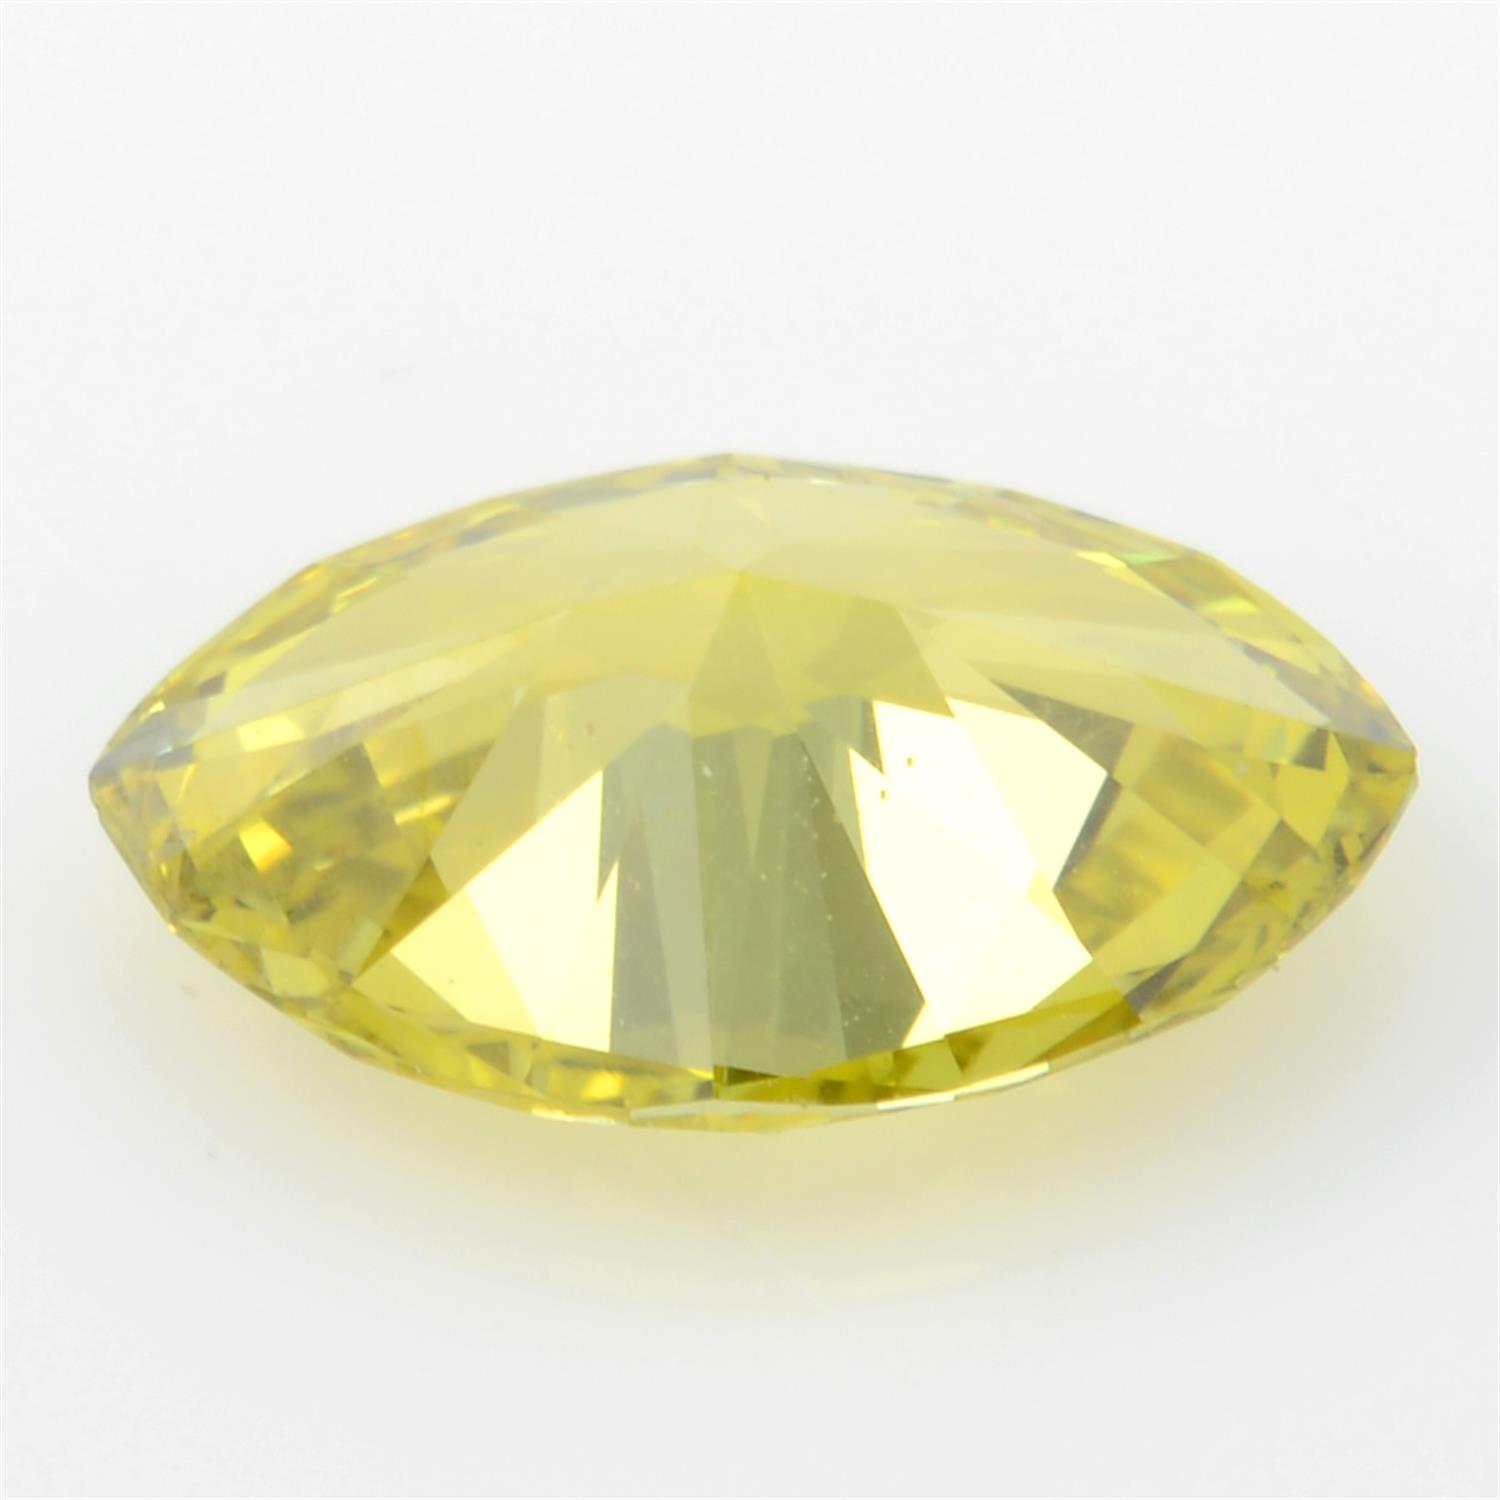 STUART DEVLIN STOCK - A marquise shape 'yellow' diamond, weighing 1.34ct - Image 2 of 2